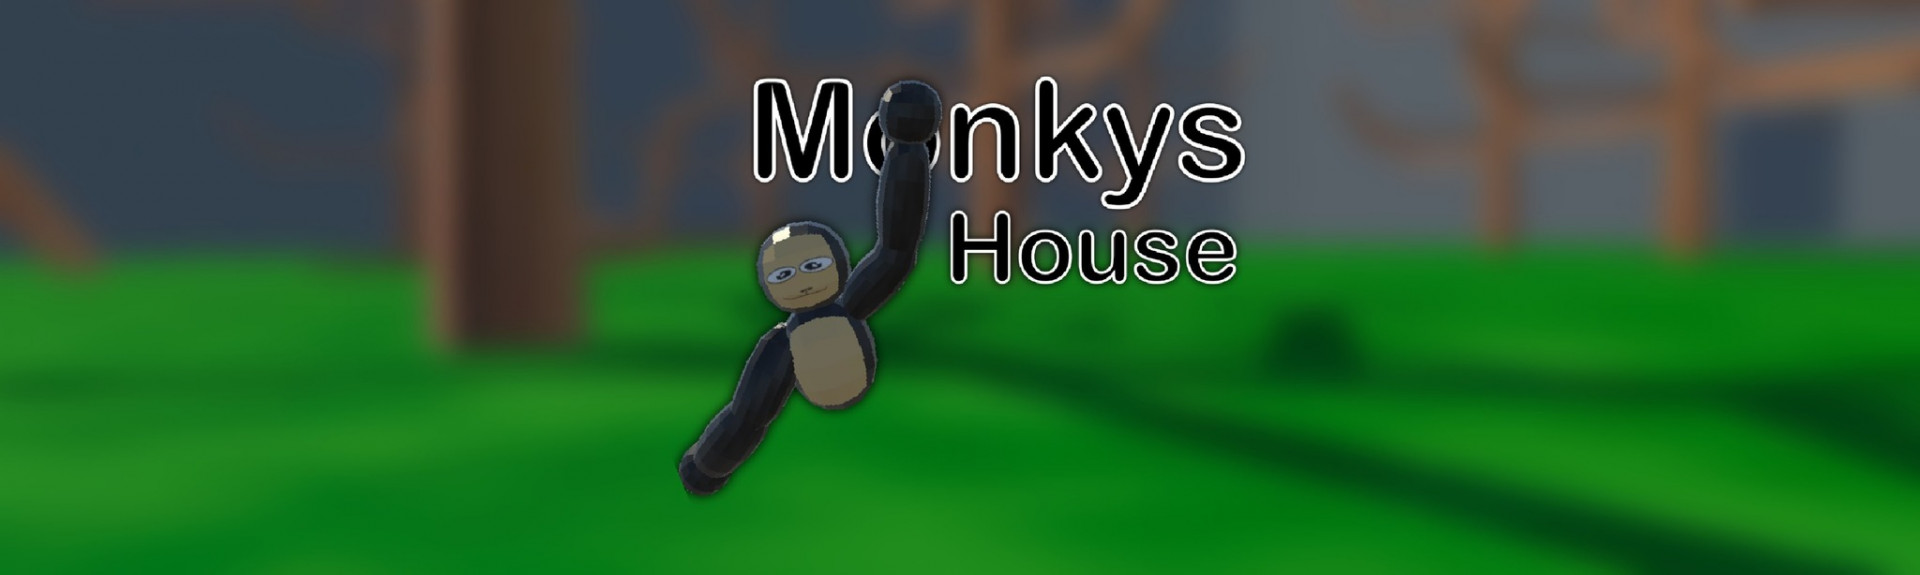 Monkys House